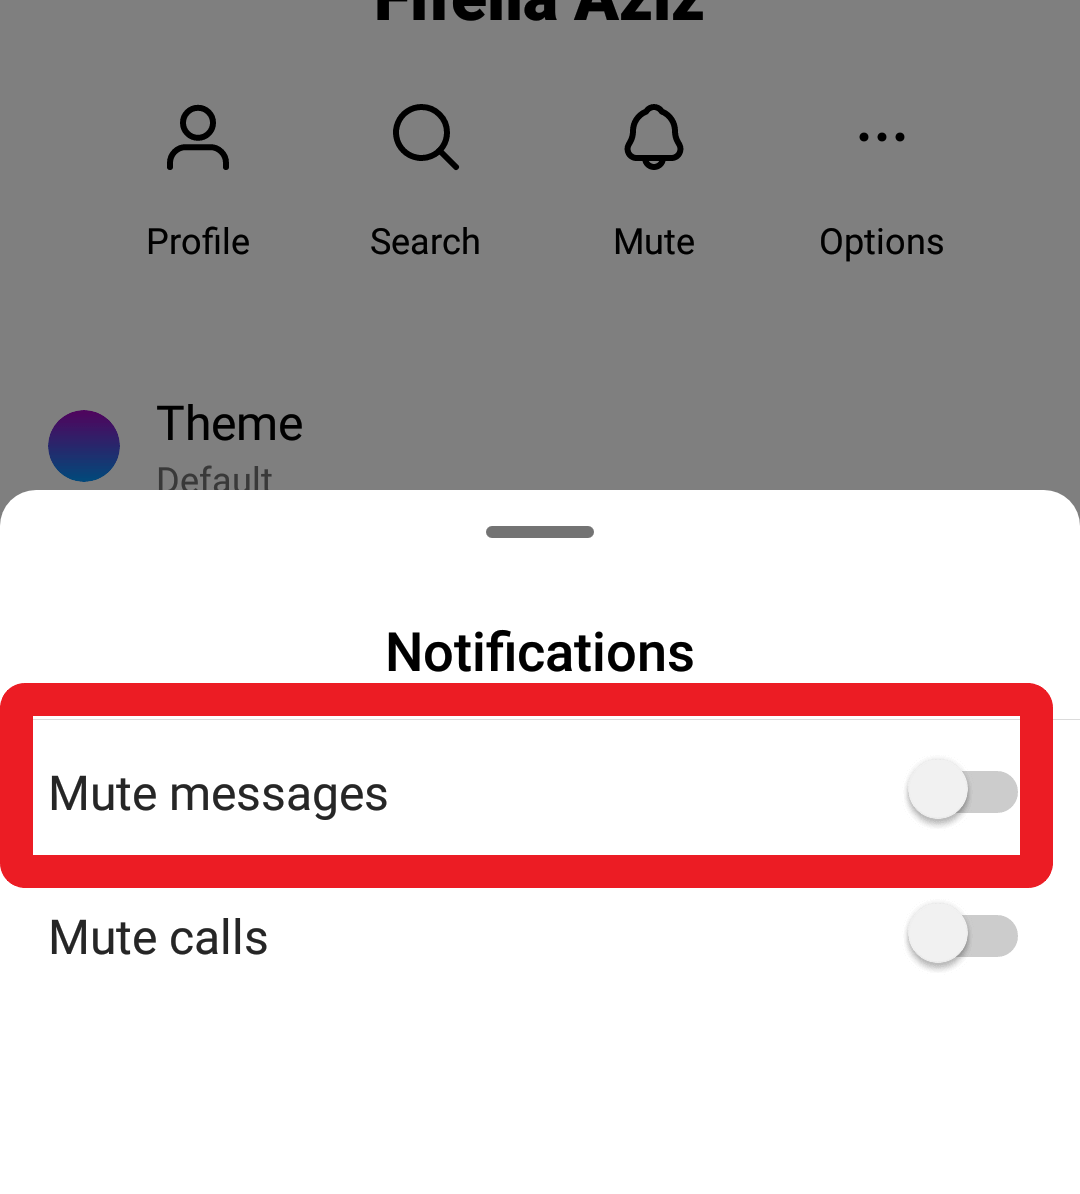 Mute messages